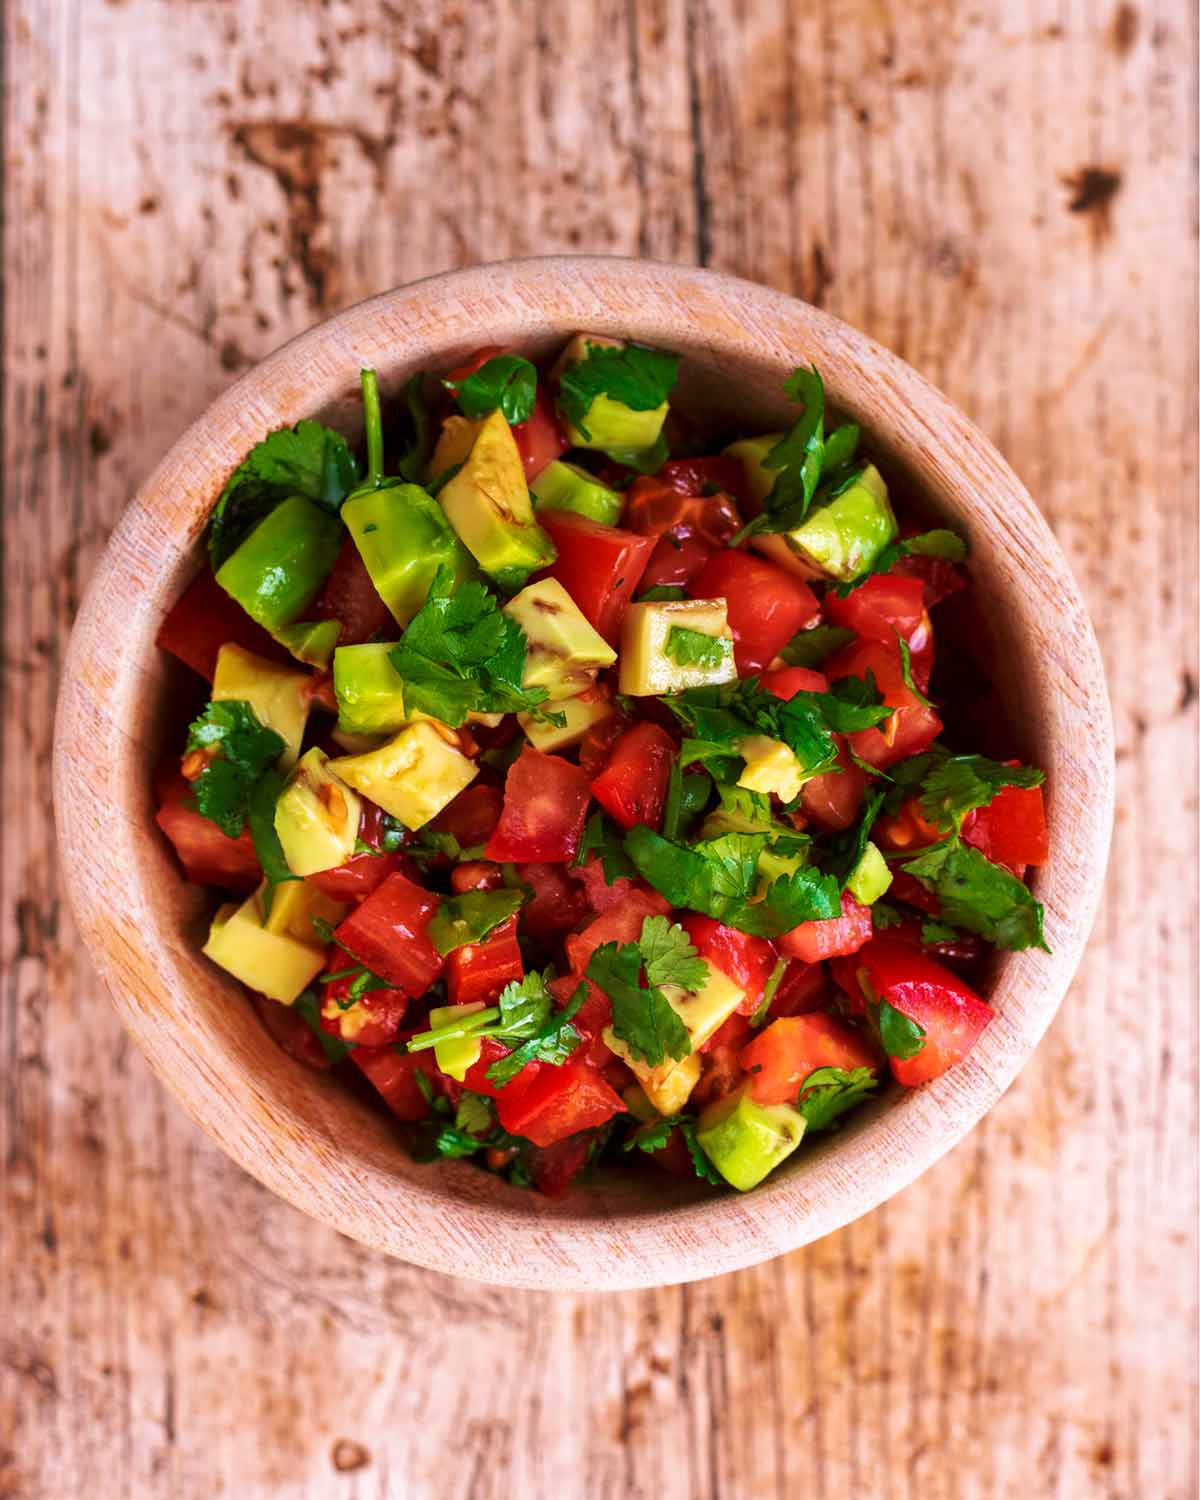 A small wooden bowl containing chopped tomato and avocado salsa